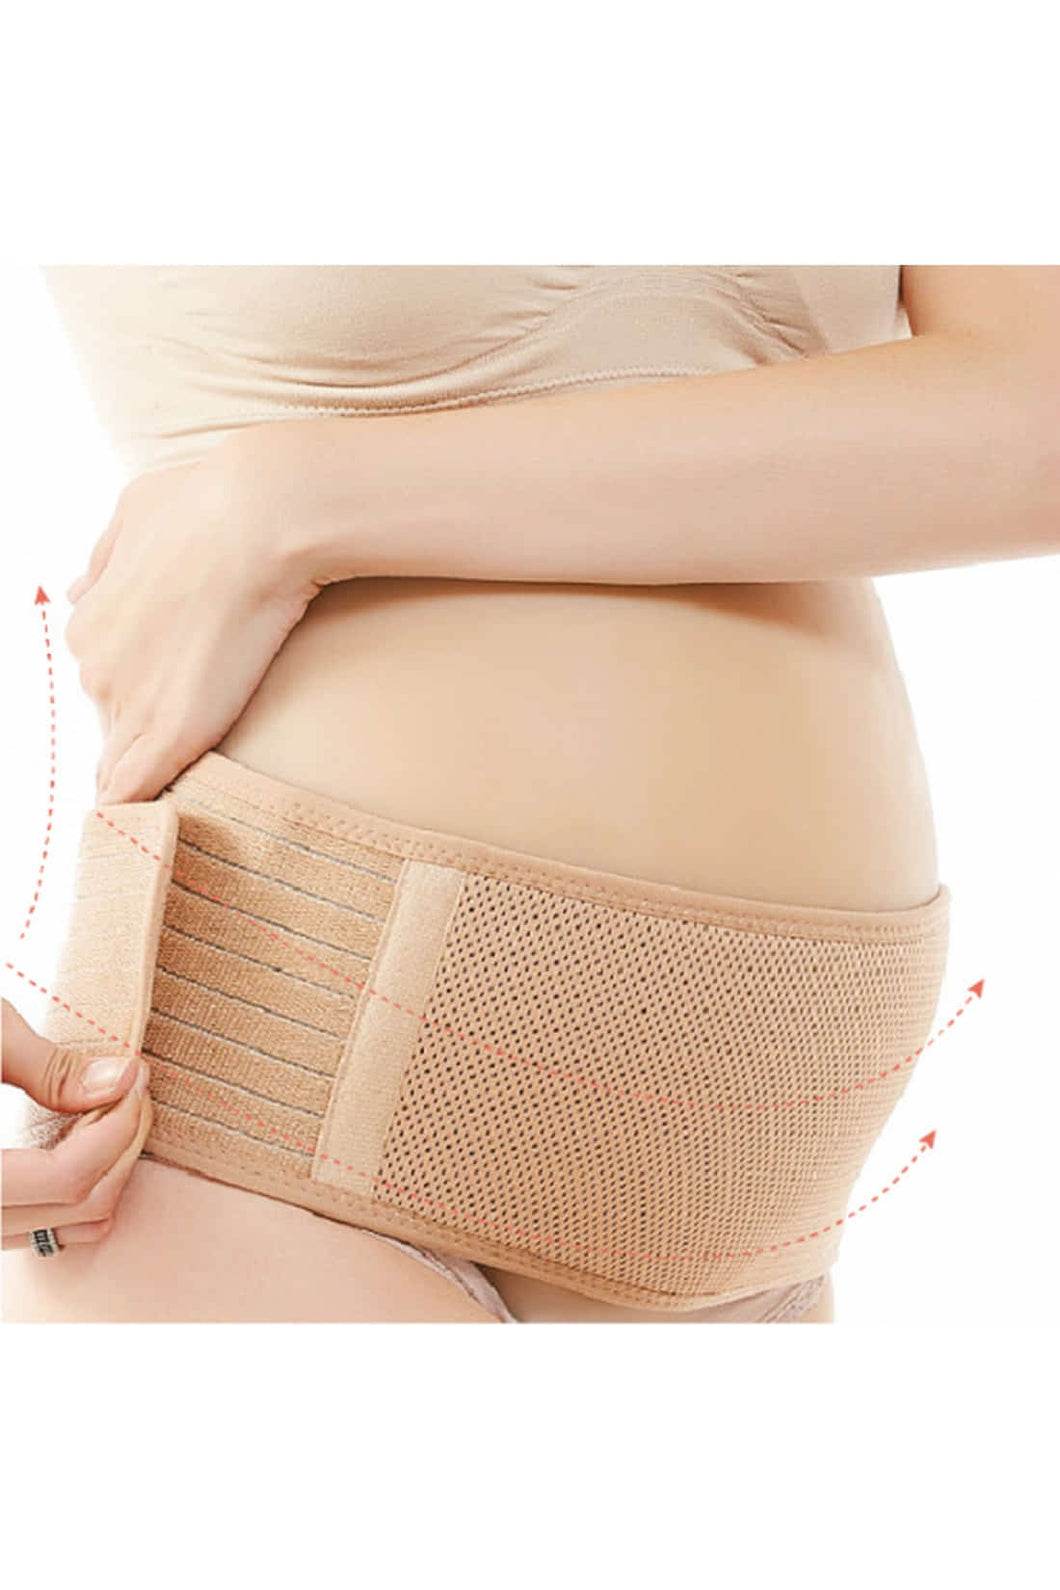 Pret a Pregger Bellywise  Pregnancy Air Mesh Support Belt - Nude